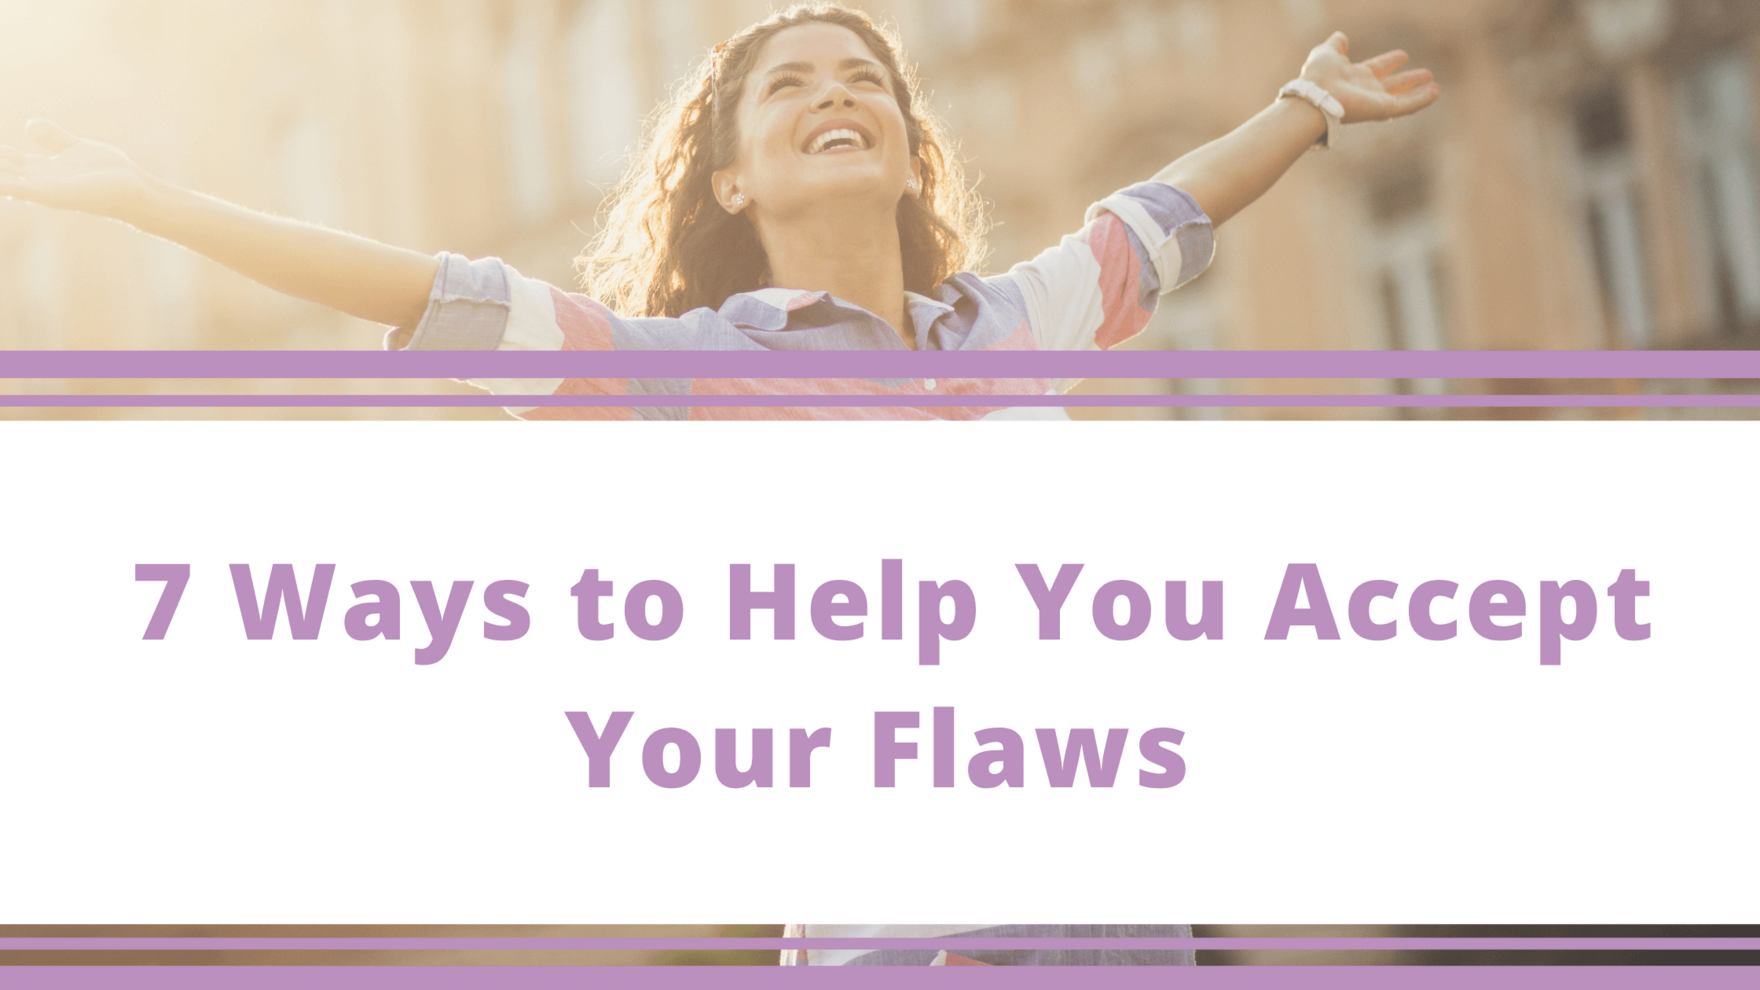 Top Tips Blog - 7 Ways to Help You Accept Your Flaws